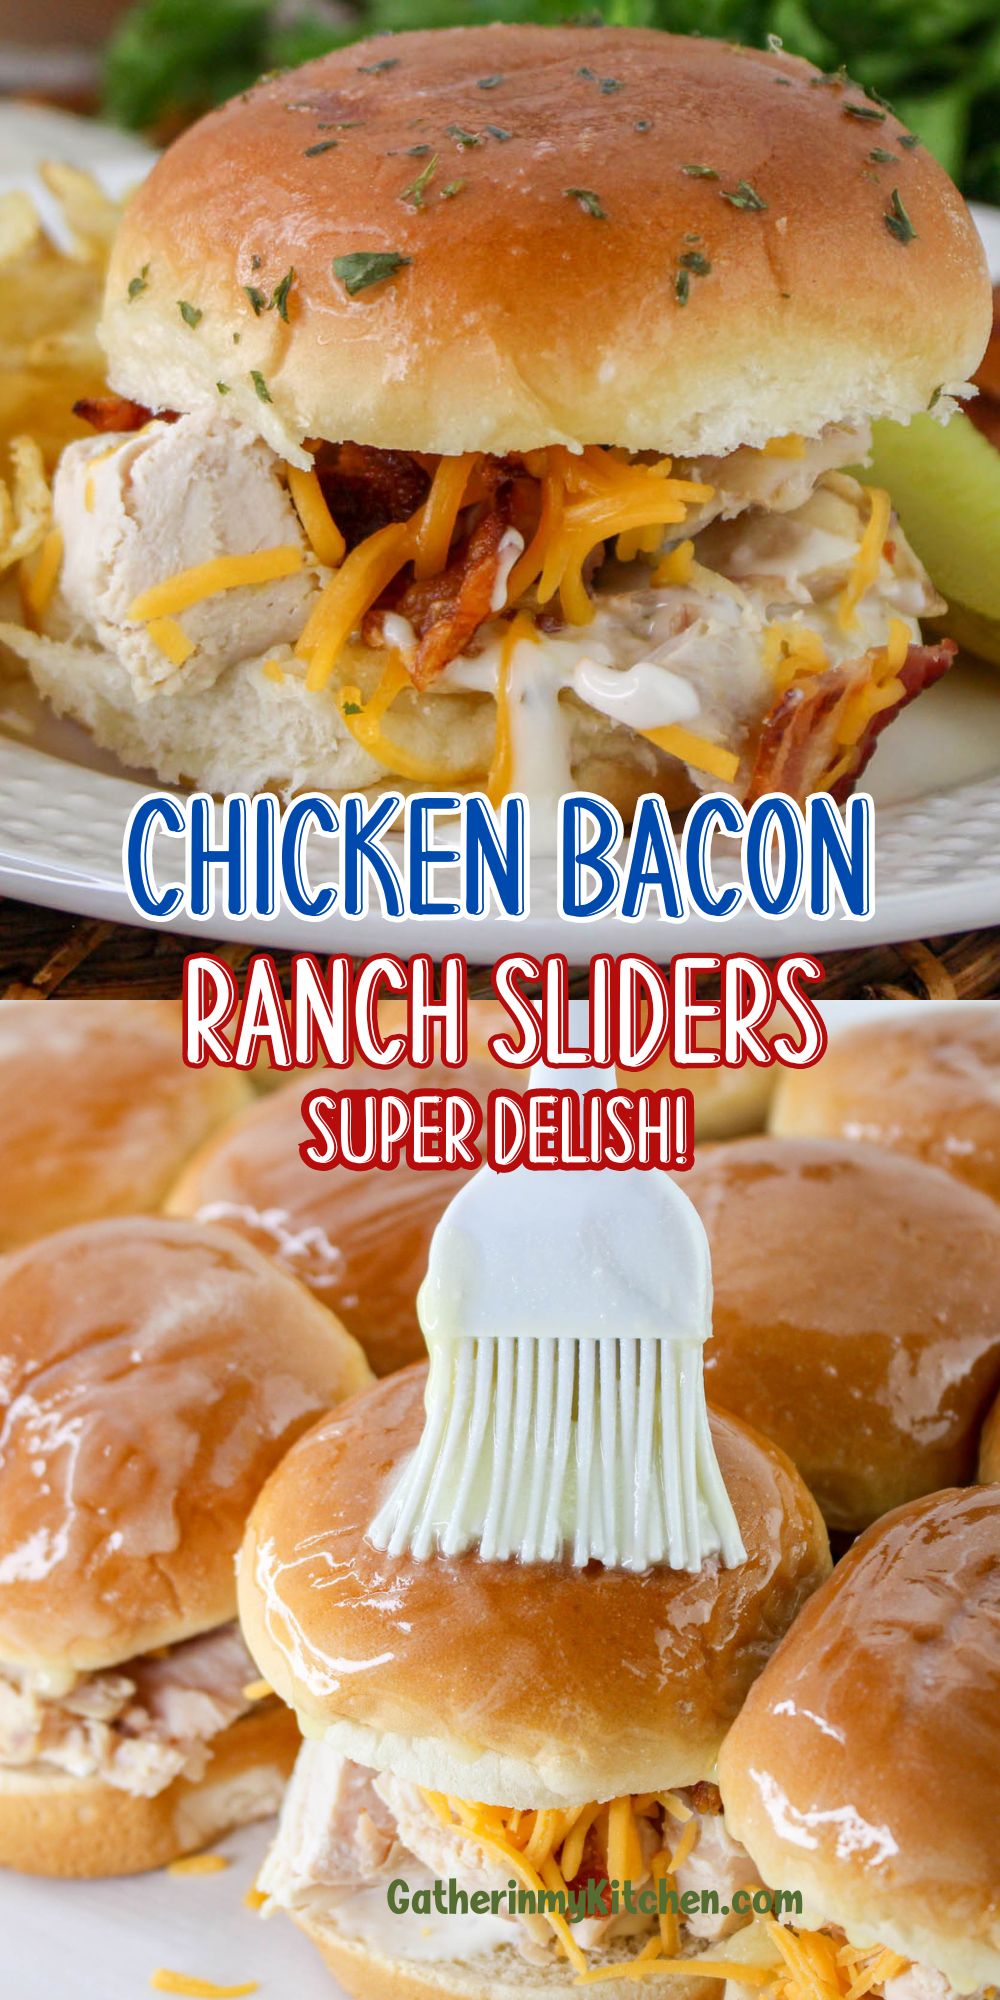 Pin image; top is a closeup of a chicken bacon ranch slider on a plate, the middle says "Chicken bacon Ranch Sliders: Super Delish!" and the bottom has a pastry brush, brushing on butter to the top of the slider buns.